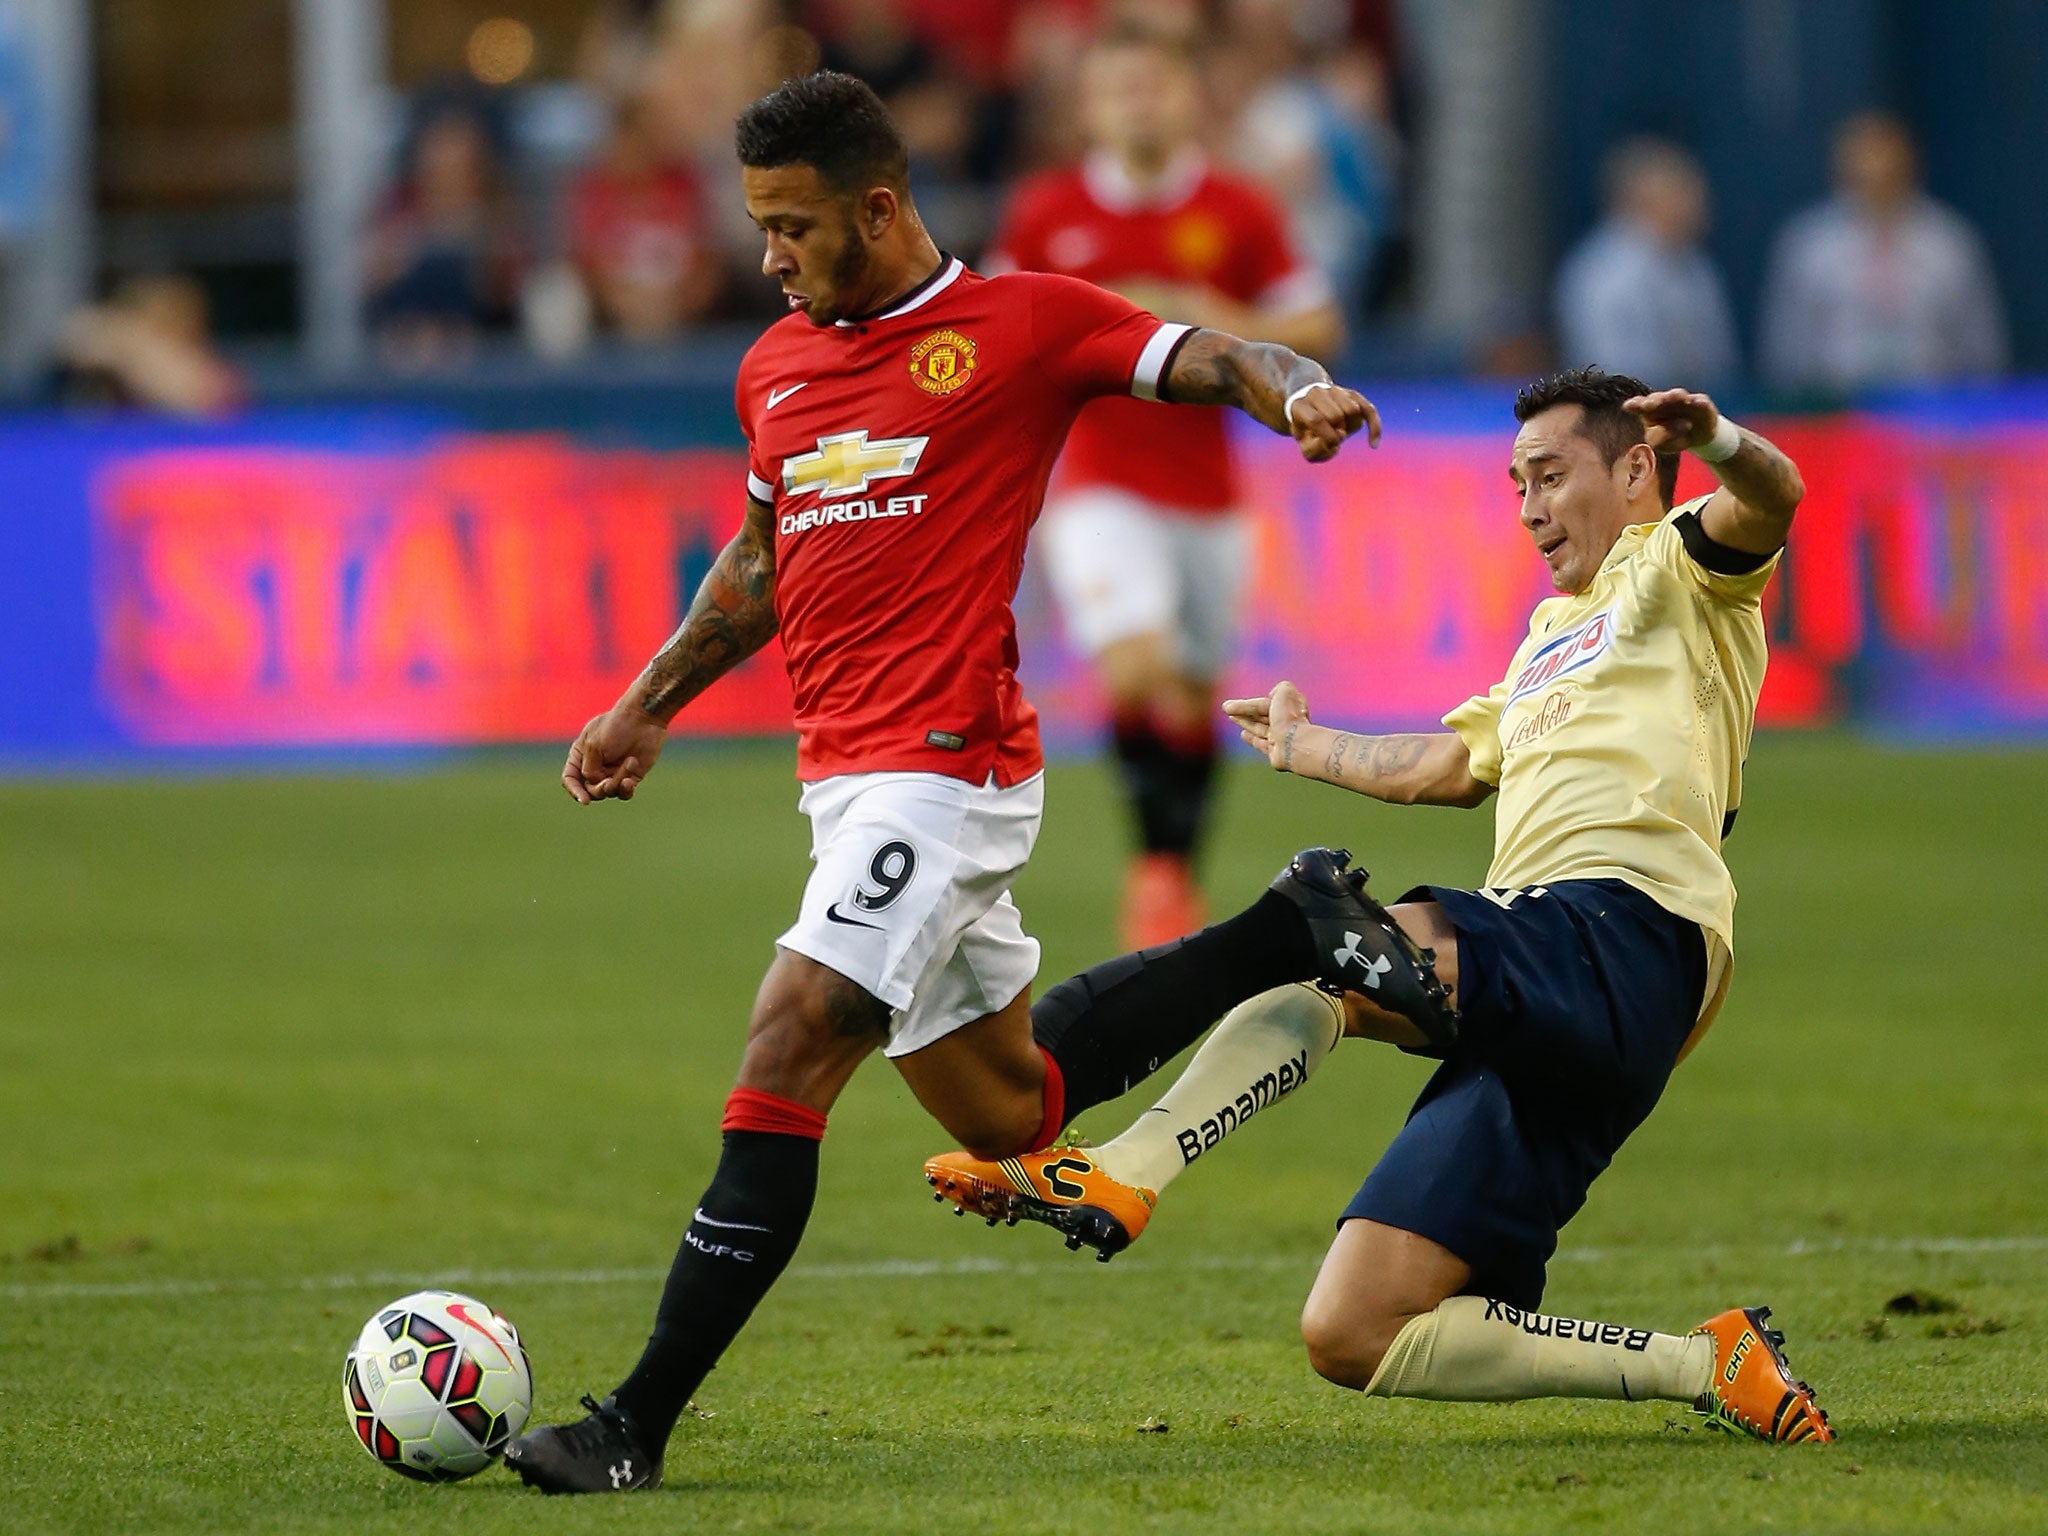 Memphis Depay in action during his Manchester United debut on Friday night